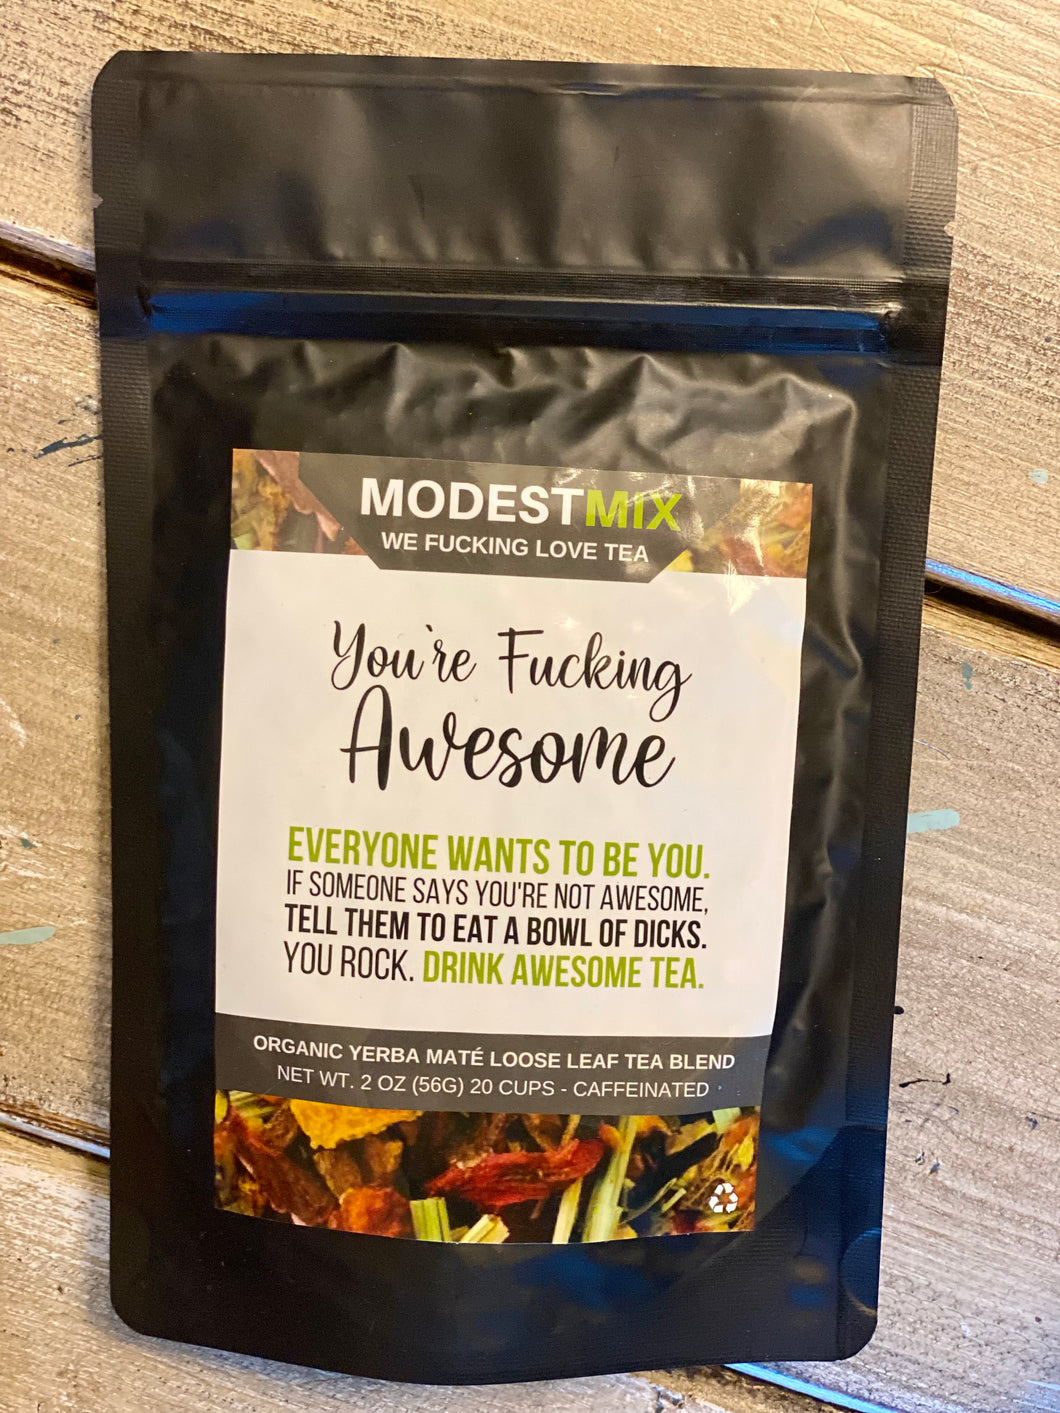 Modest Mix You’re Fucking Awesome Tea